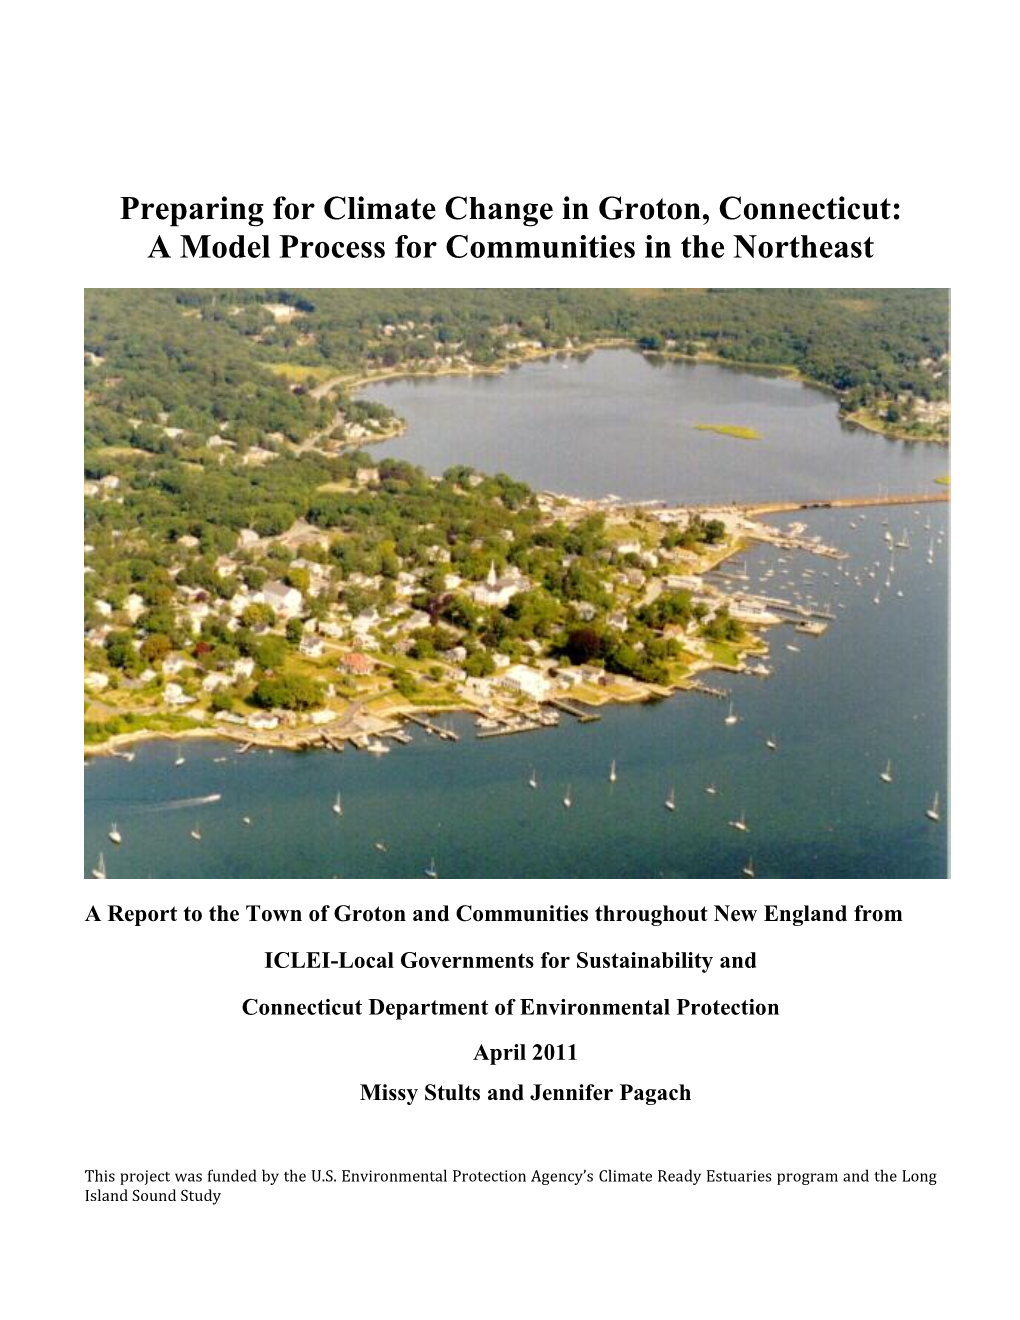 Preparing for Climate Change in Groton, Connecticut: a Model Process for Communities in the Northeast